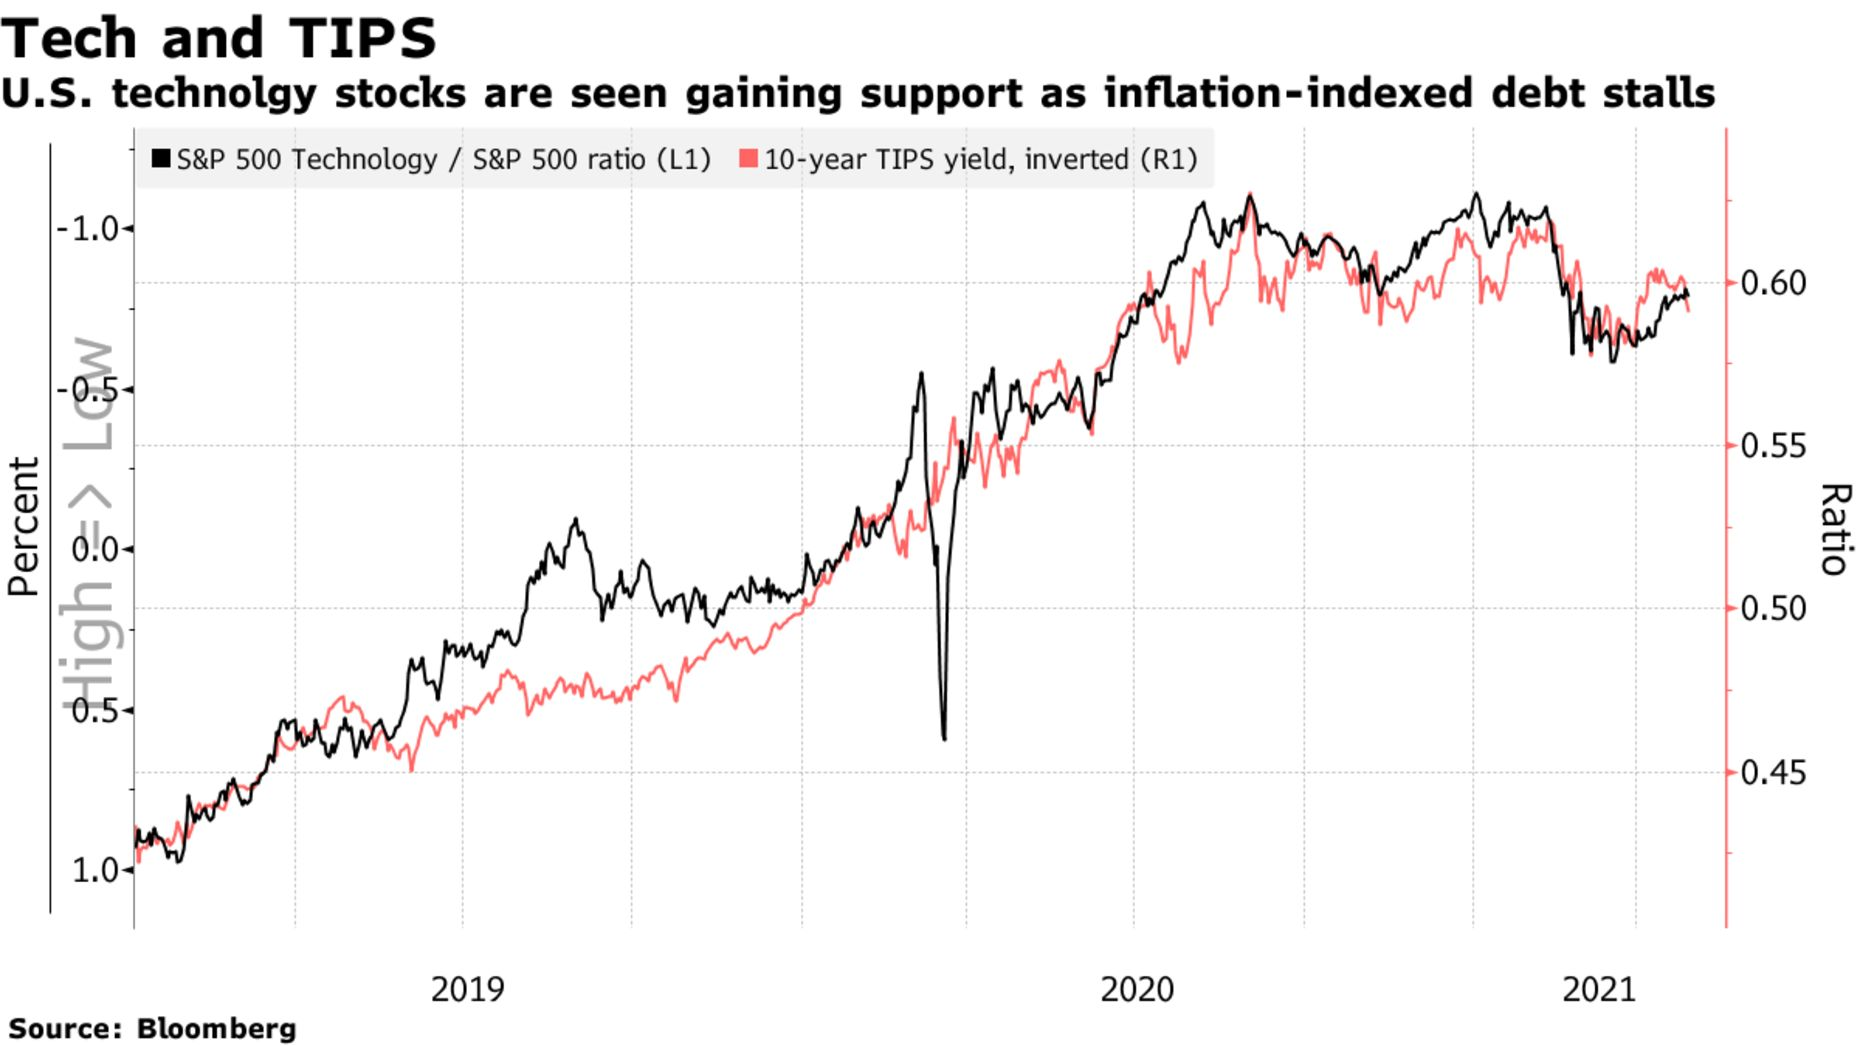 U.S. technolgy stocks are seen gaining support as inflation-indexed debt stalls